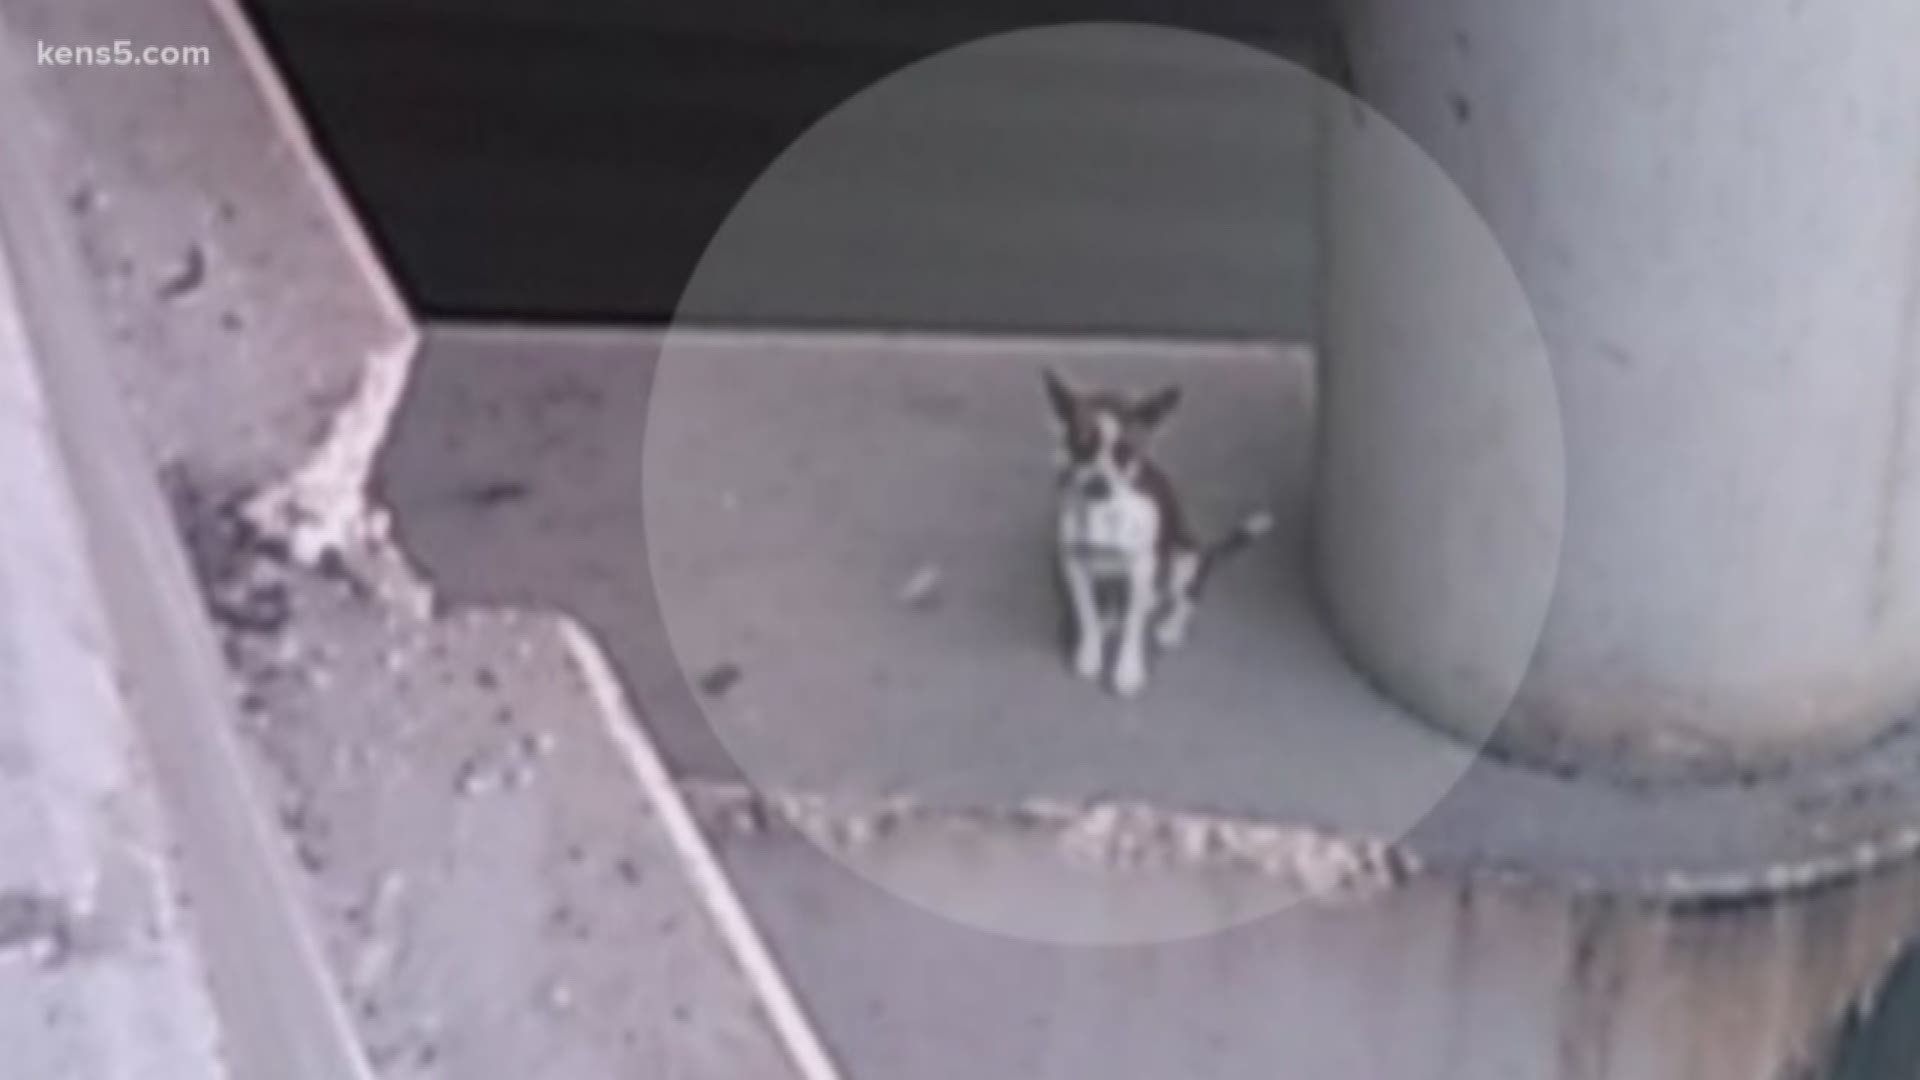 It was an unusual sight on a San Antonio highway. It was a quiet Thursday afternoon when a call came into San Antonio Police about a canine in distress. The call required the help of Animal Care Services. Eyewitness News reporter Jeremy Baker has the story.